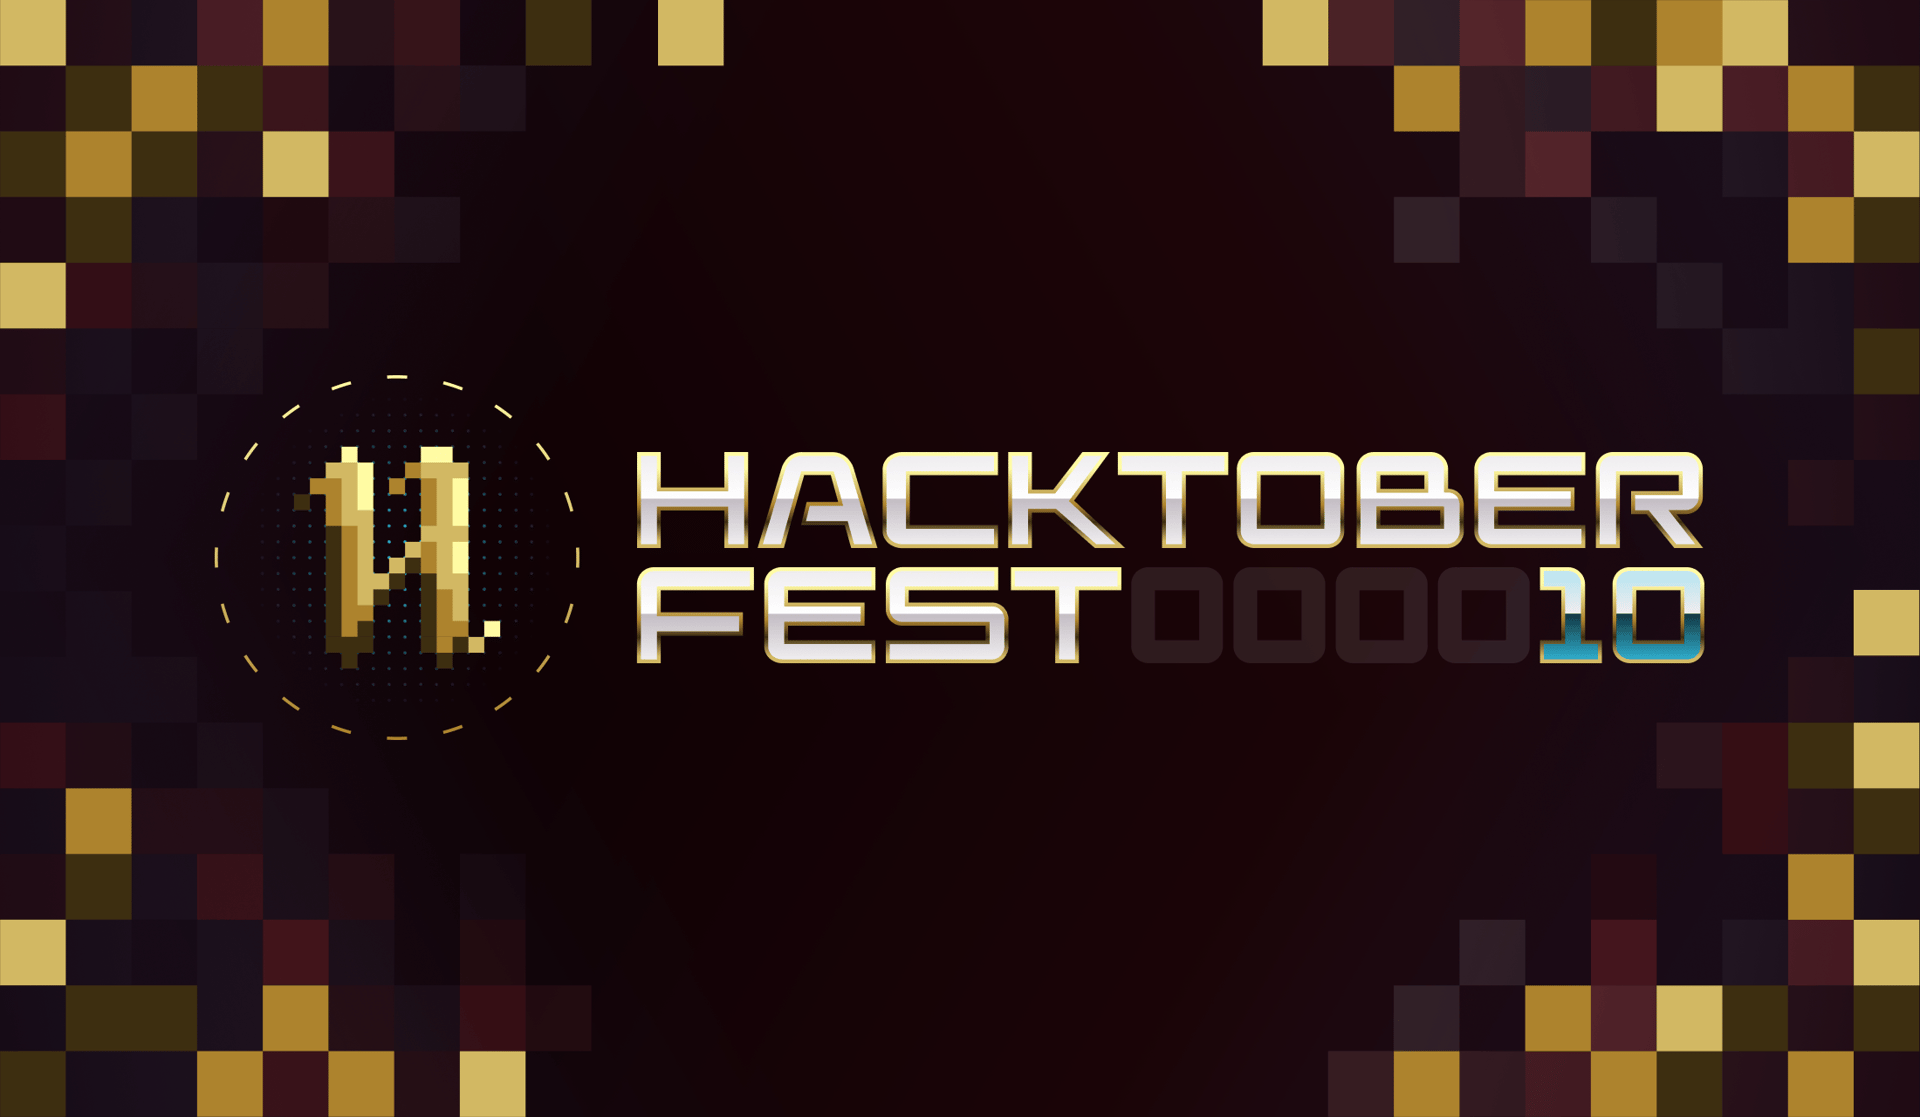 The 10th anniversary of Hacktoberfest is a wrap!